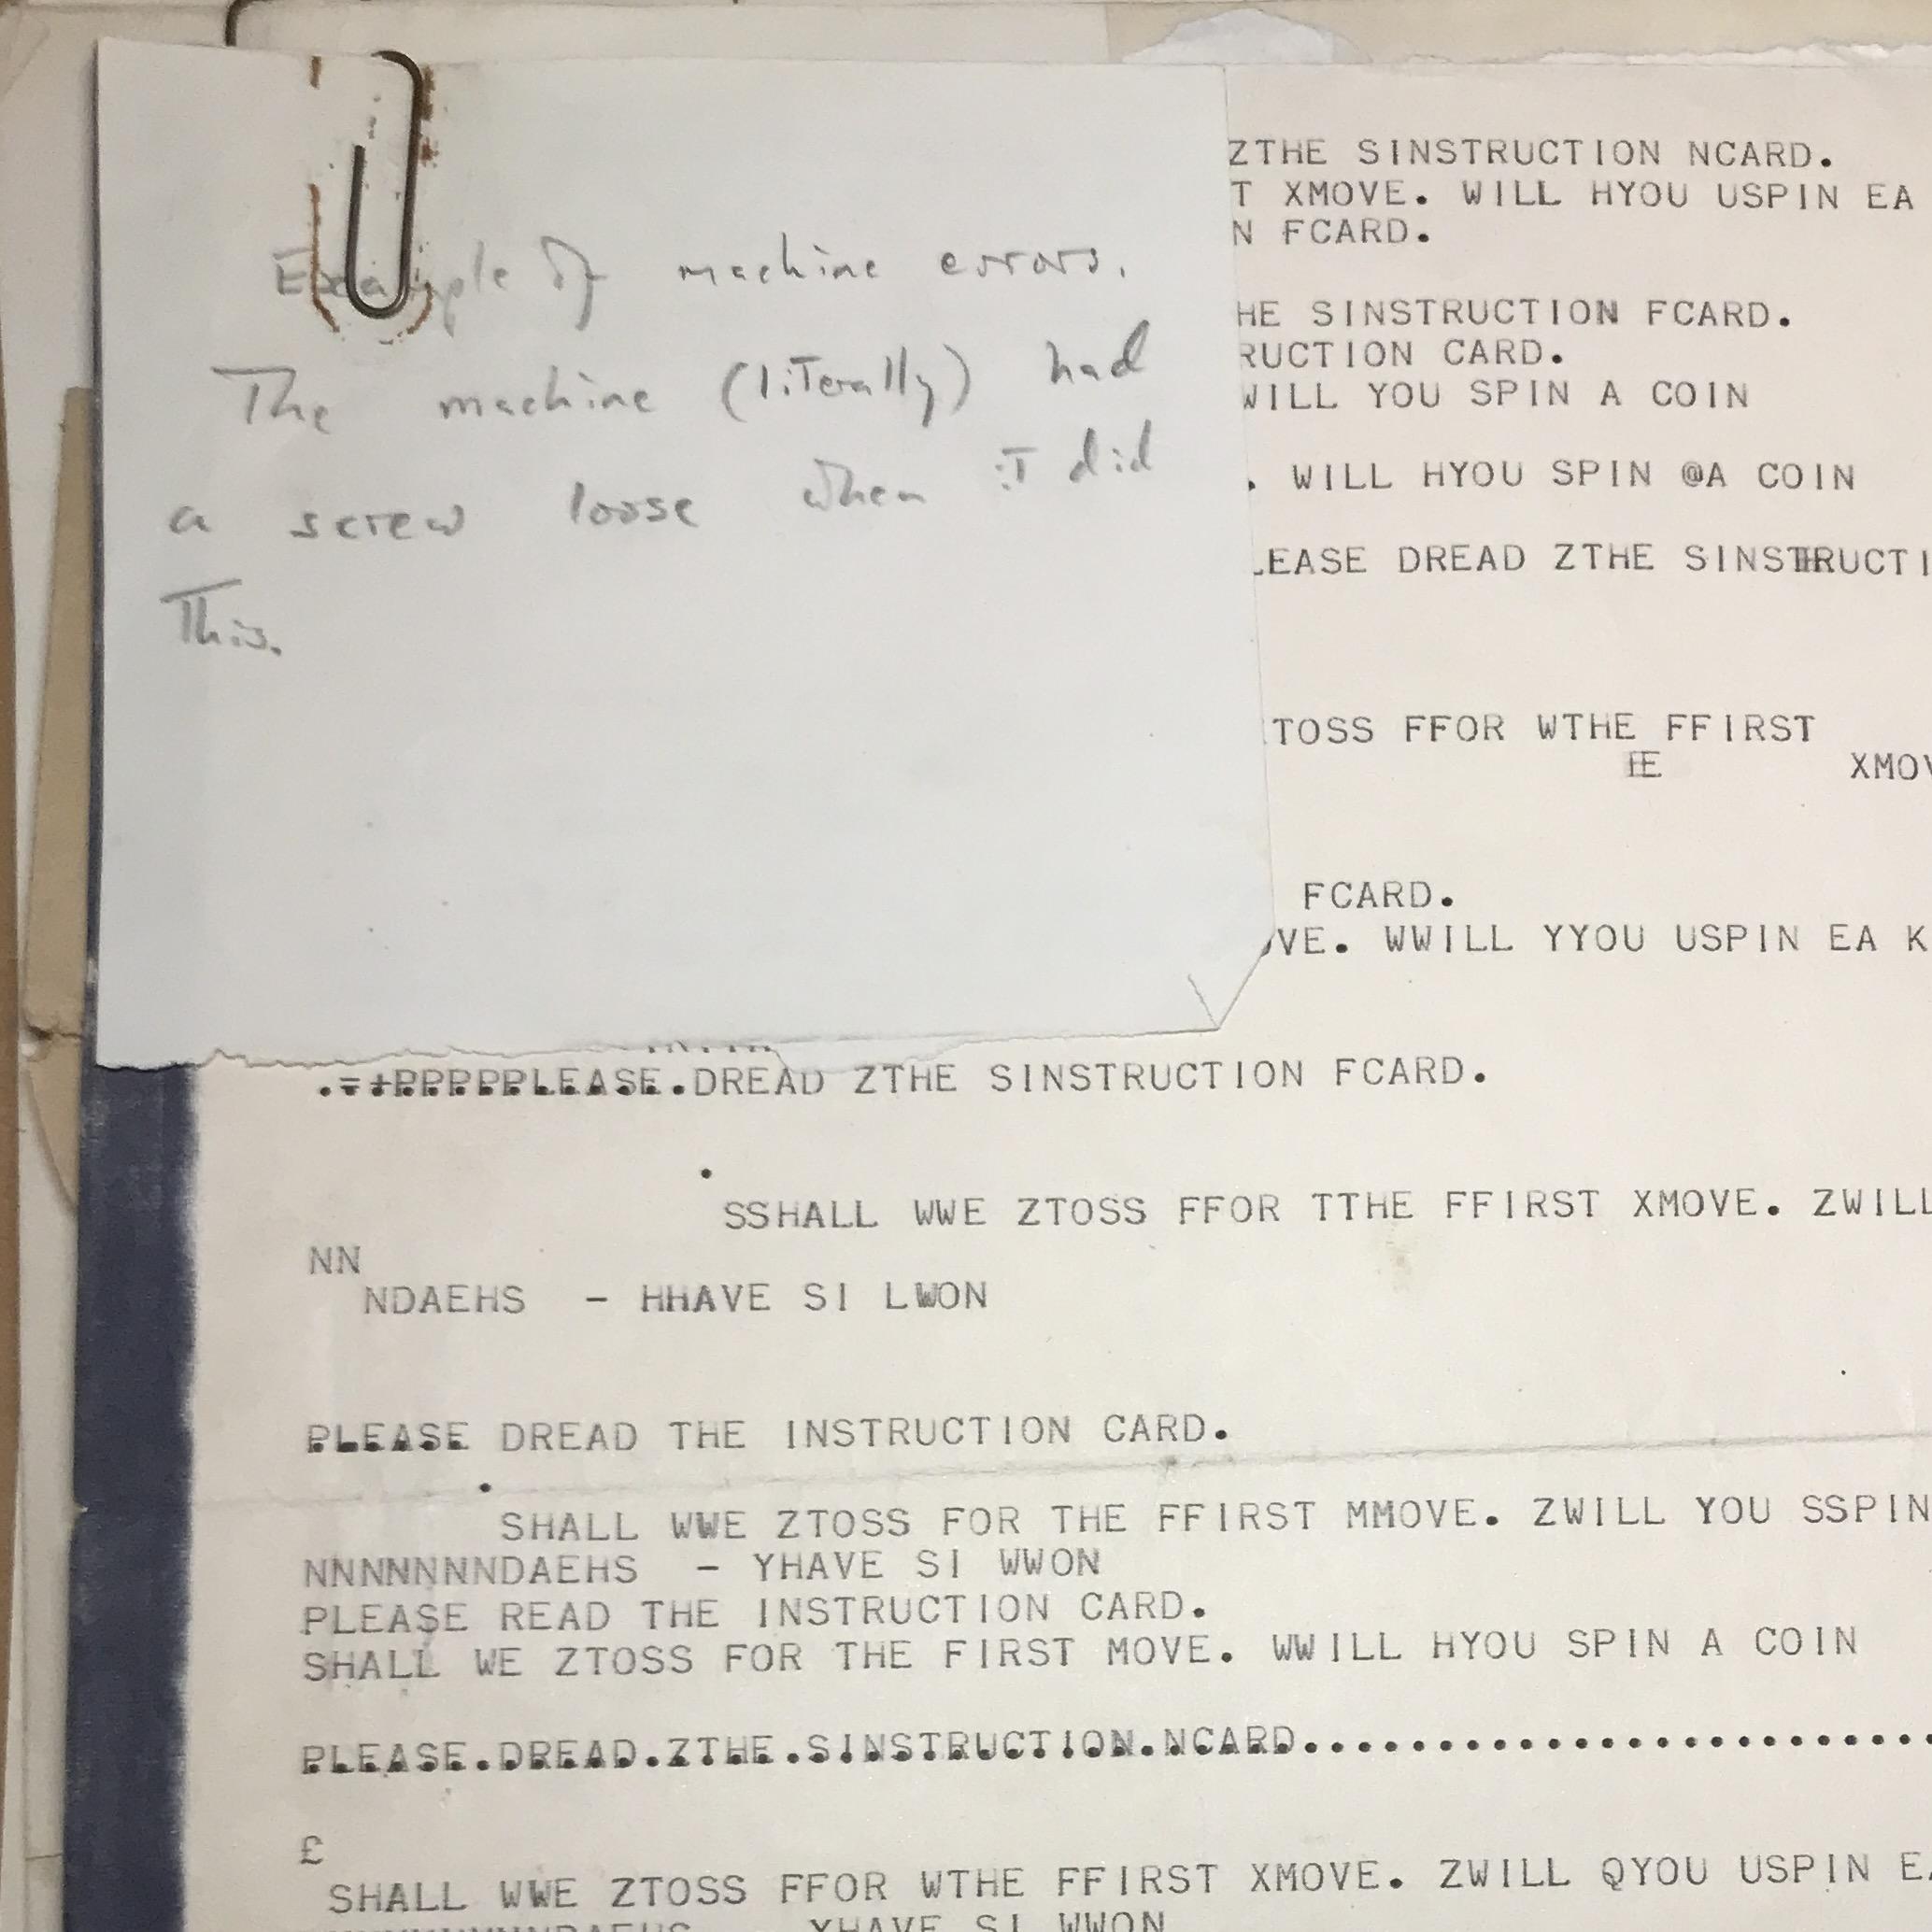 "Example of machine errors. The machine literally had a screw loose when it did this." working papers from Papers and correspondence of Christopher Strachey, 1952. Bodleian MS. Eng. misc. b. 258, C30